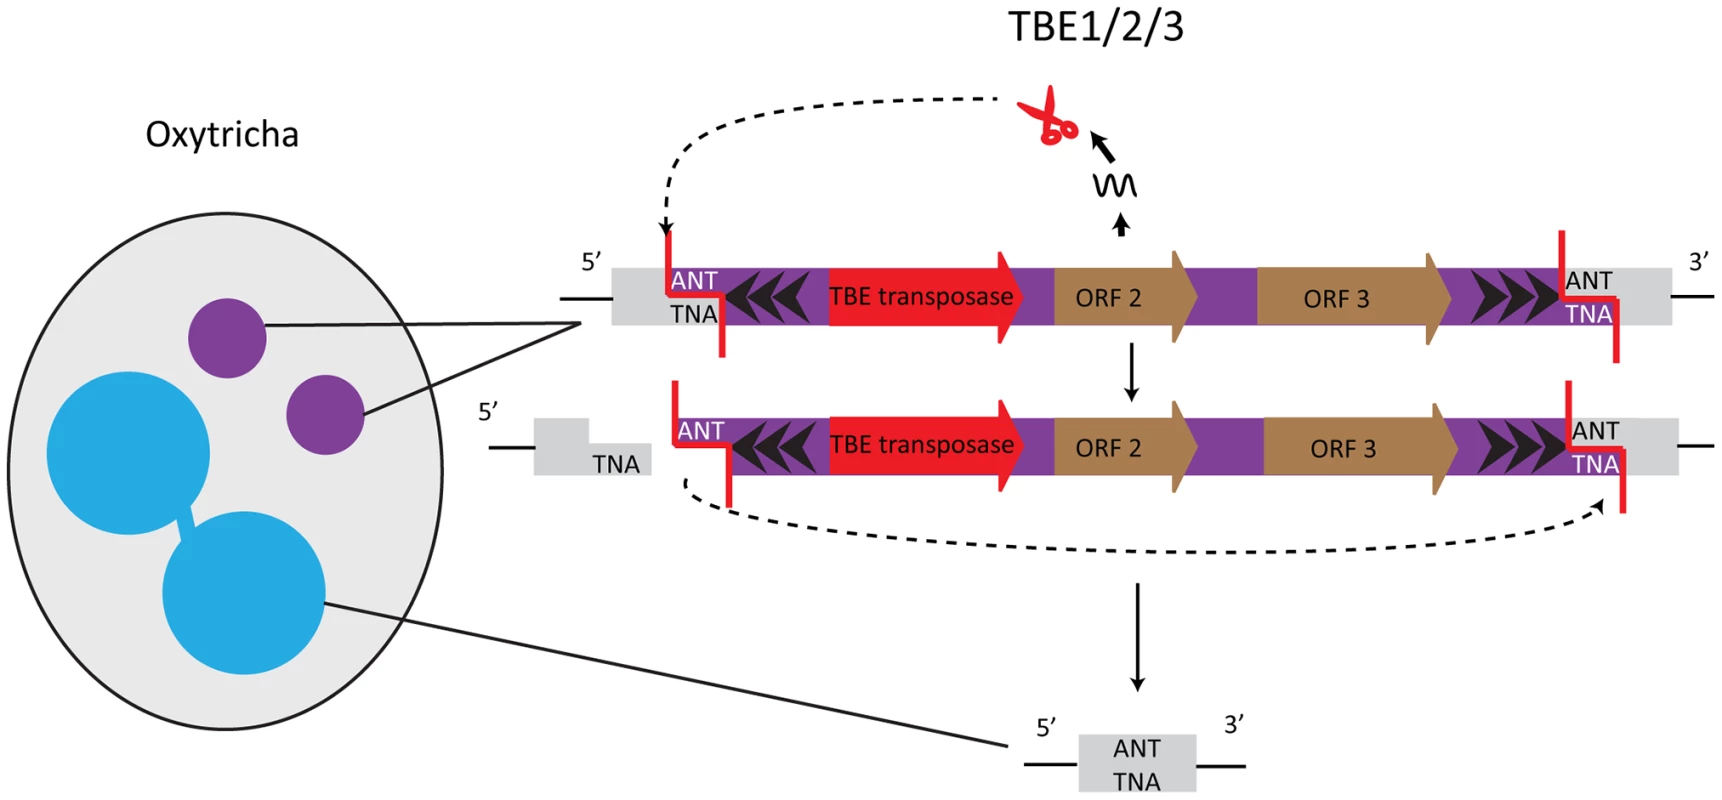 TBE transposases in Oxytricha are germline-limited sequences and they participate in their own removal.